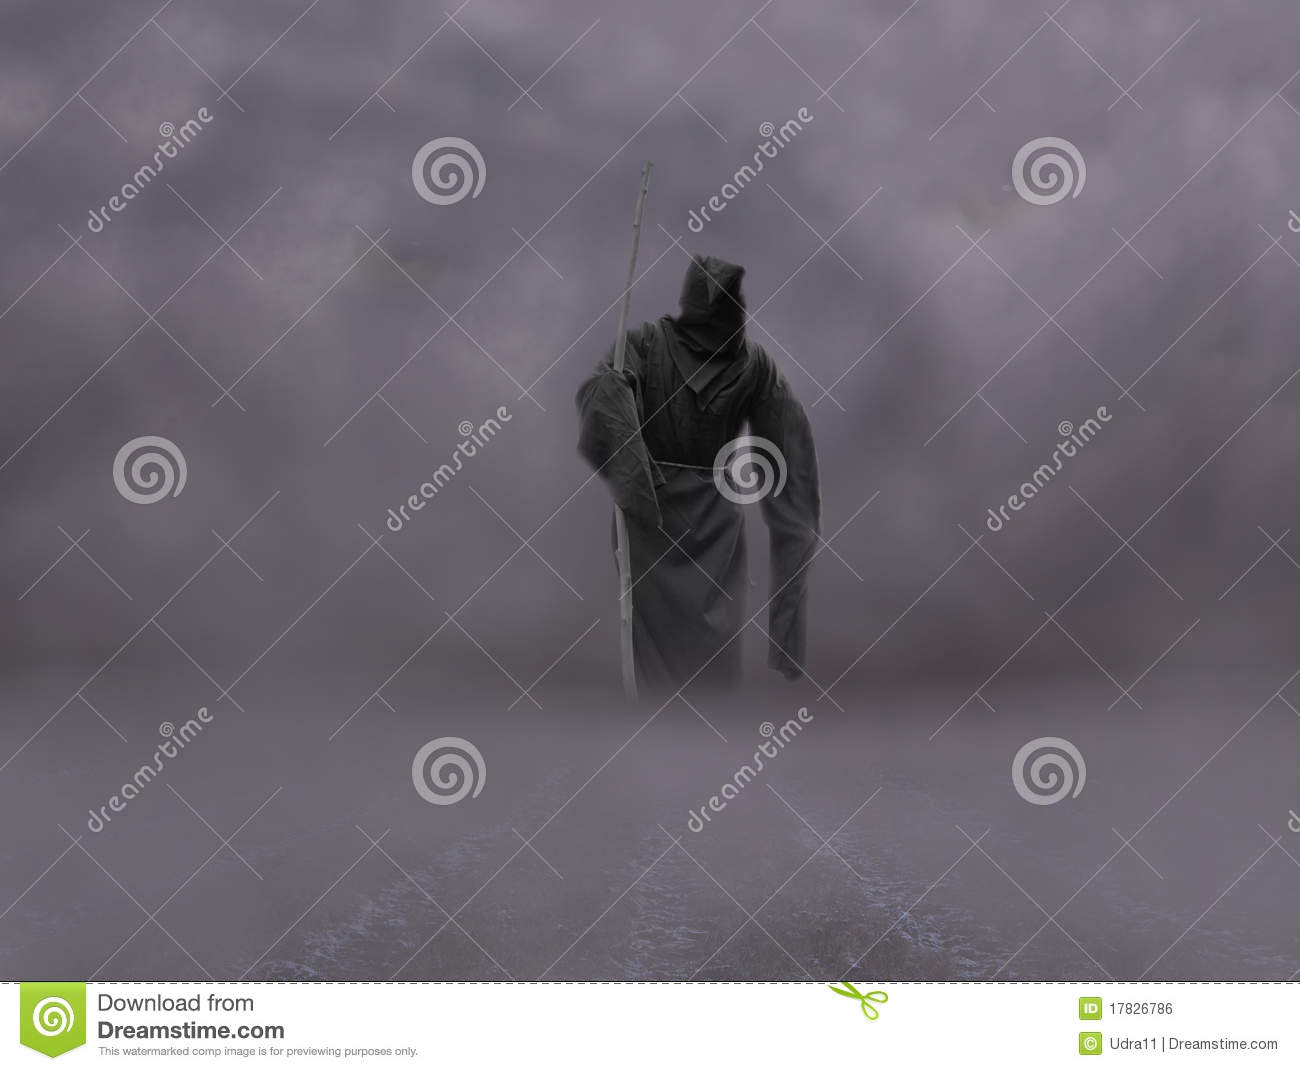 Angel Of Death Royalty Free Stock Image   Image  17826786